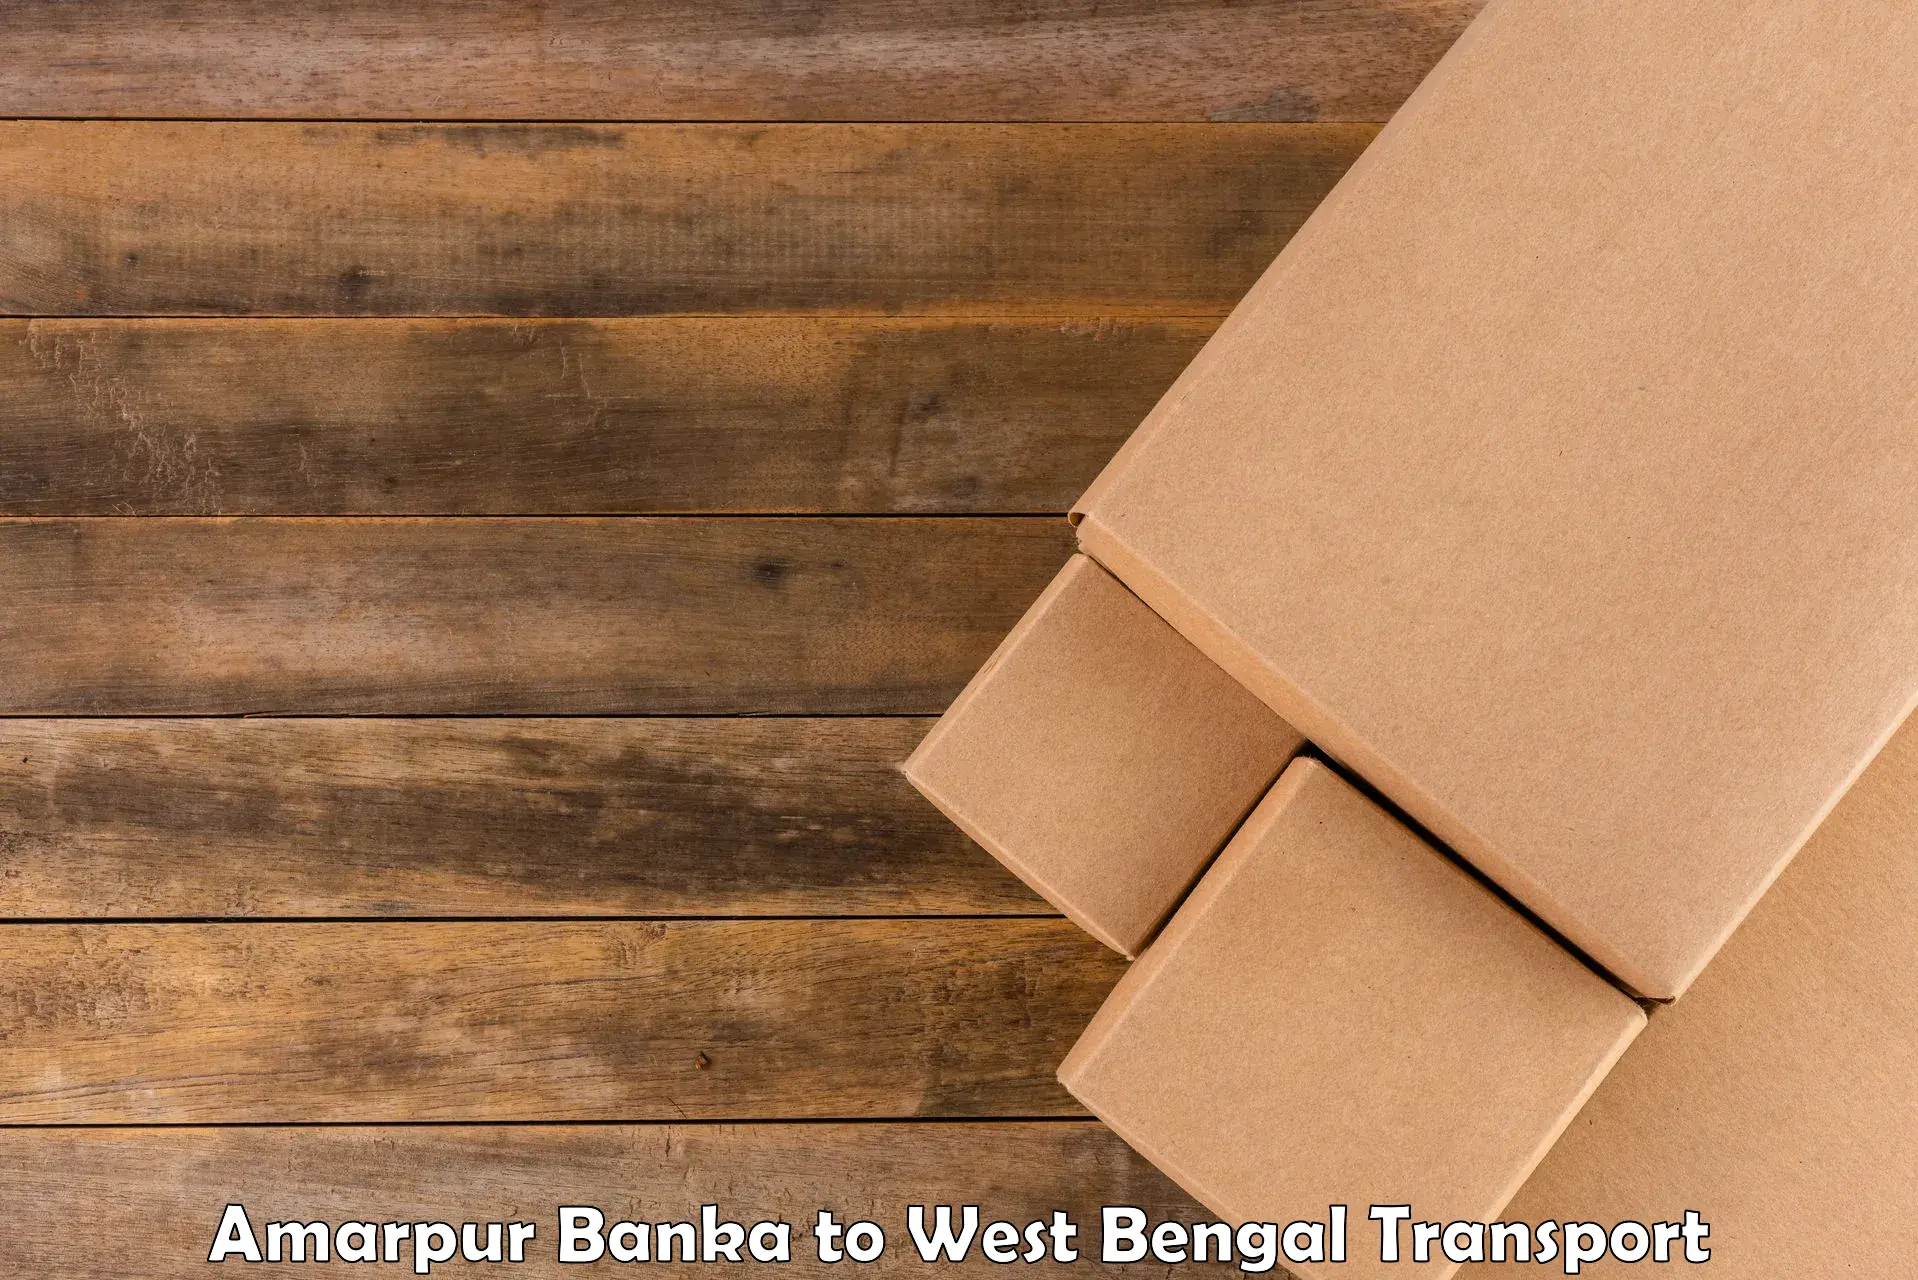 Air freight transport services Amarpur Banka to West Bengal